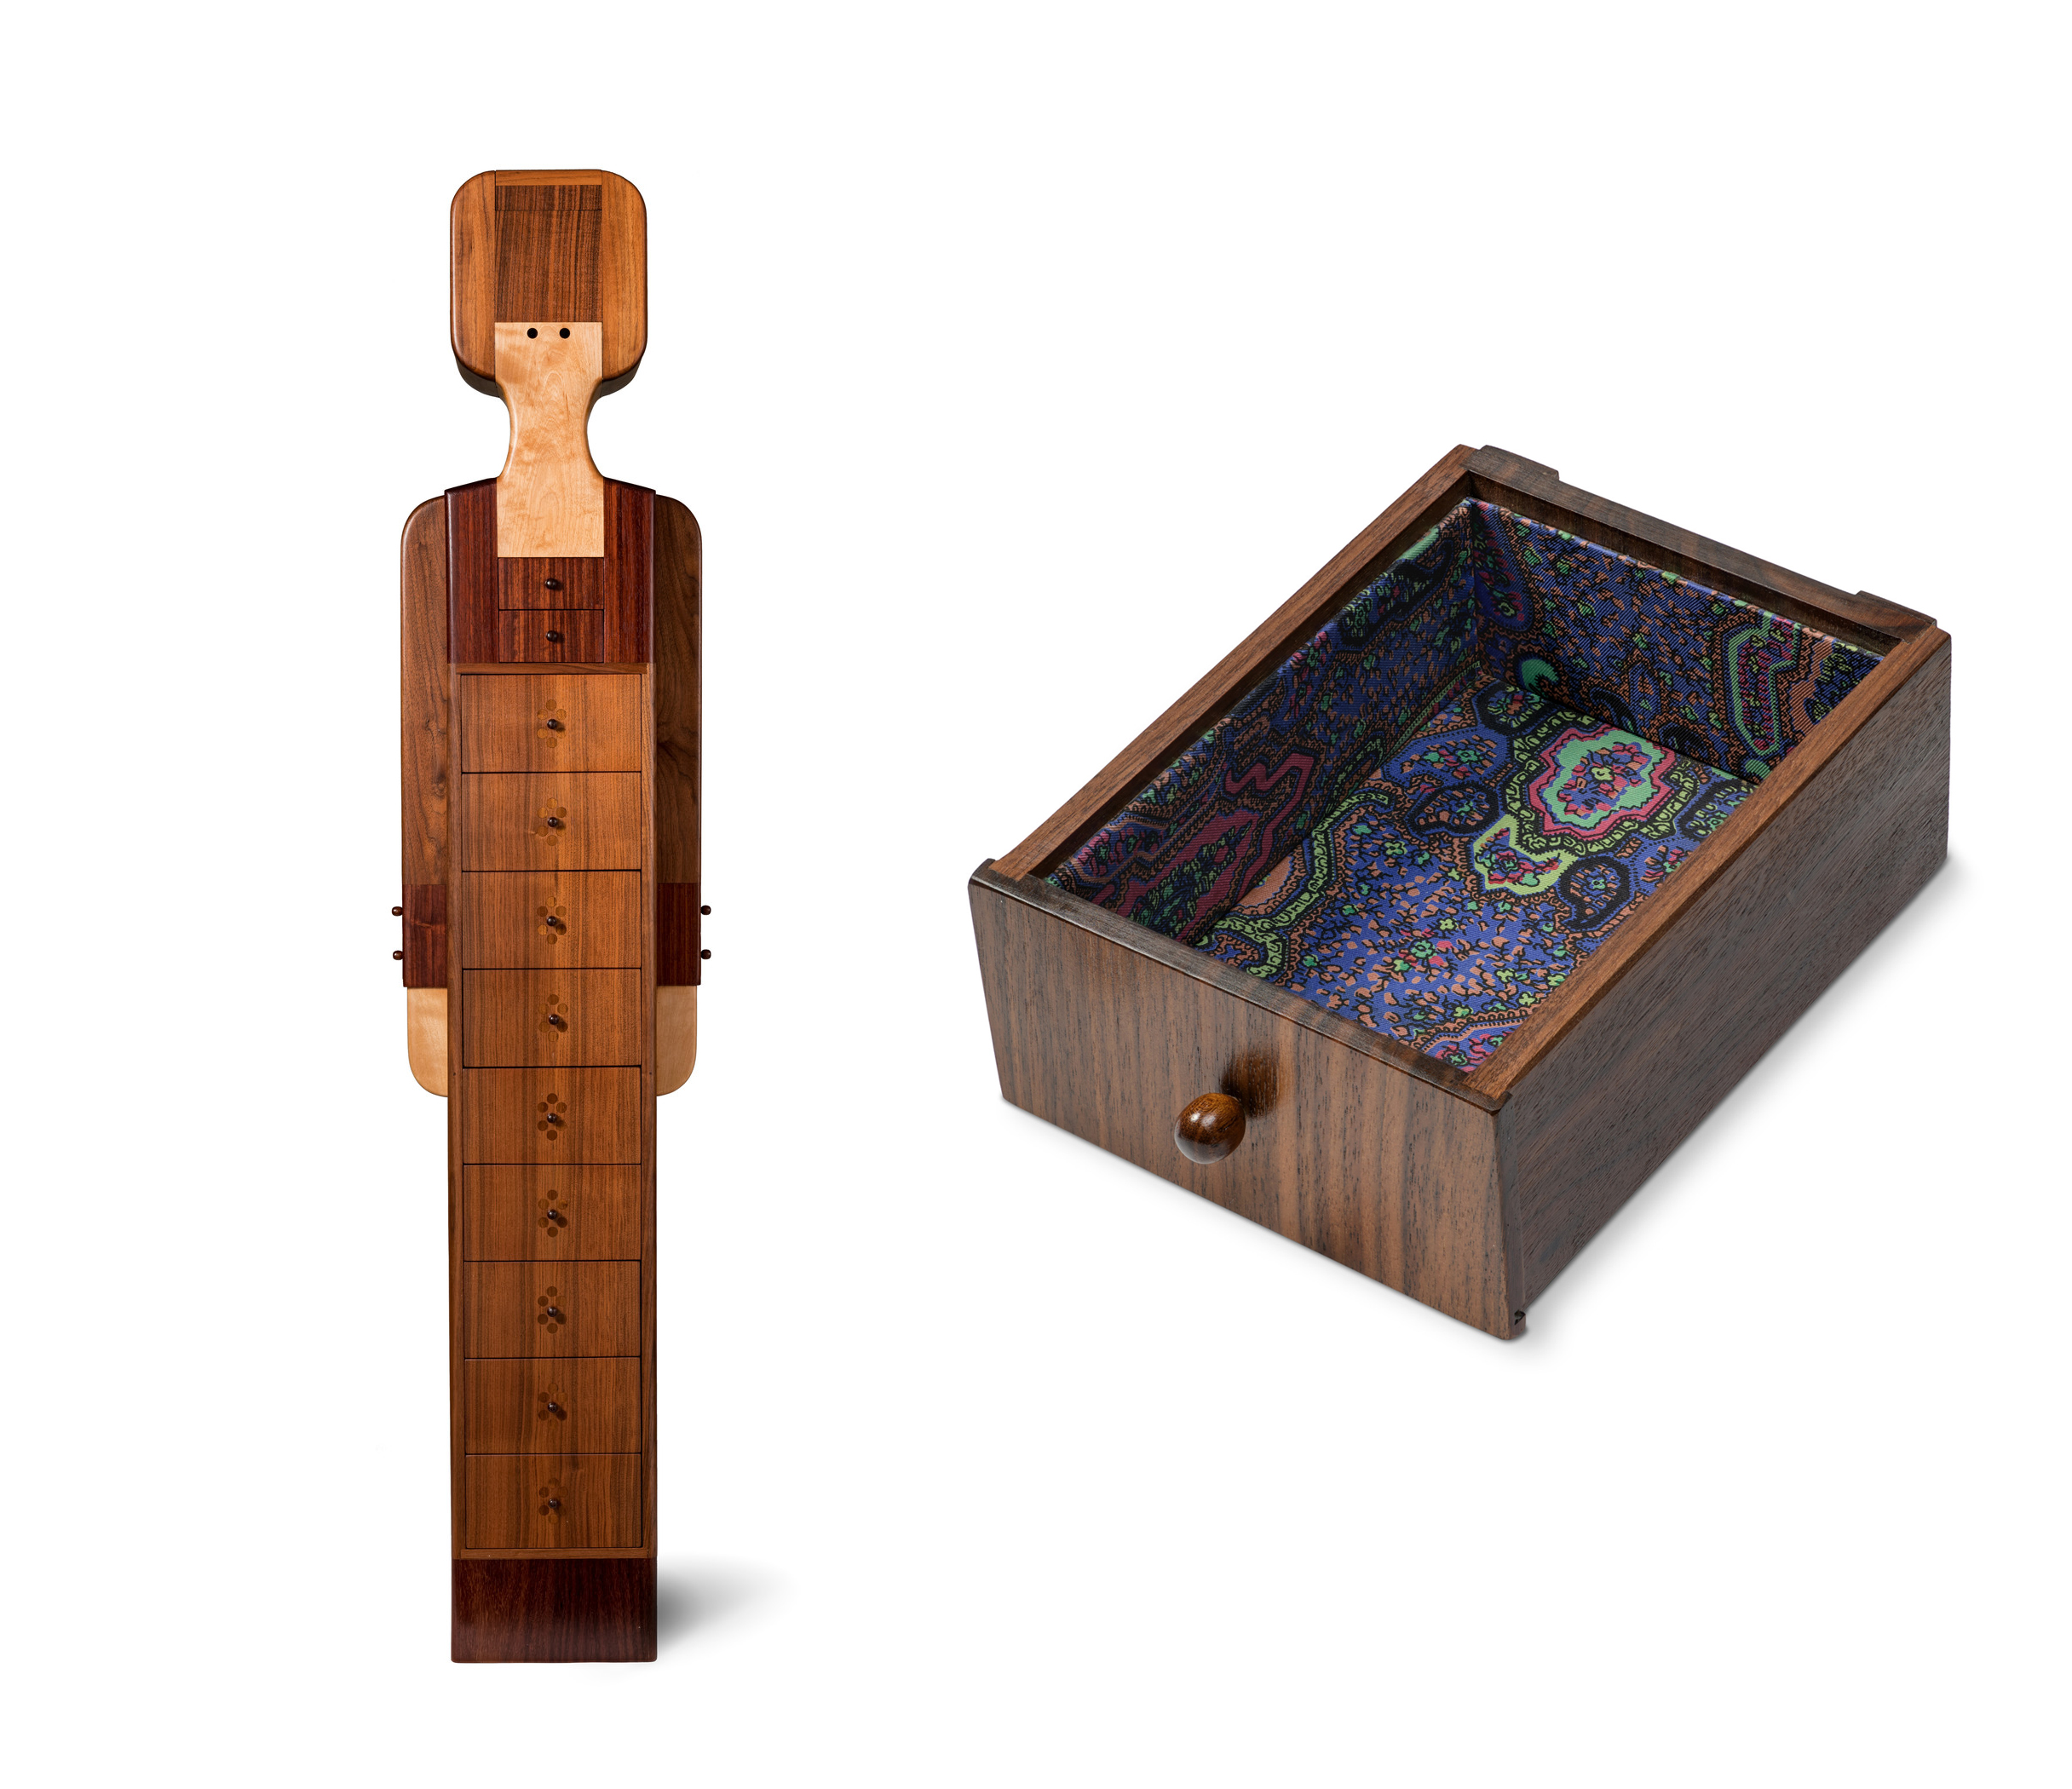 Pamela Weir-Quiton, Sloopy chest of drawers (drawer detail on right), 1966, Los Angeles County Museum of Art, gift of the 2019 Decorative Arts and Design Acquisitions Committee (DA²), photo © Museum Associates/LACMA